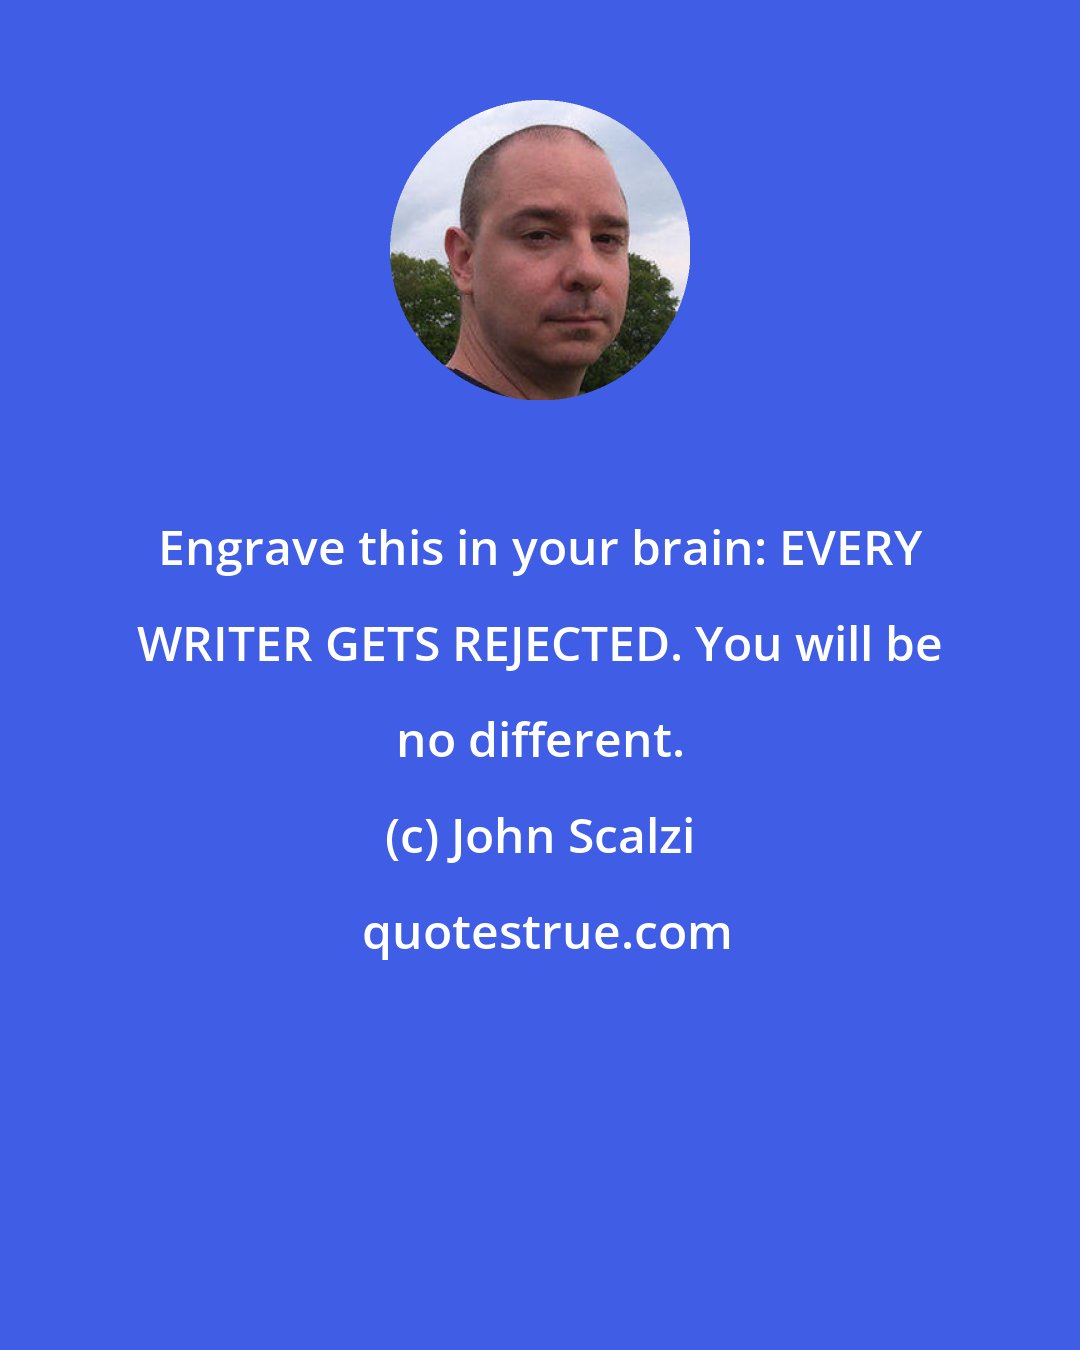 John Scalzi: Engrave this in your brain: EVERY WRITER GETS REJECTED. You will be no different.